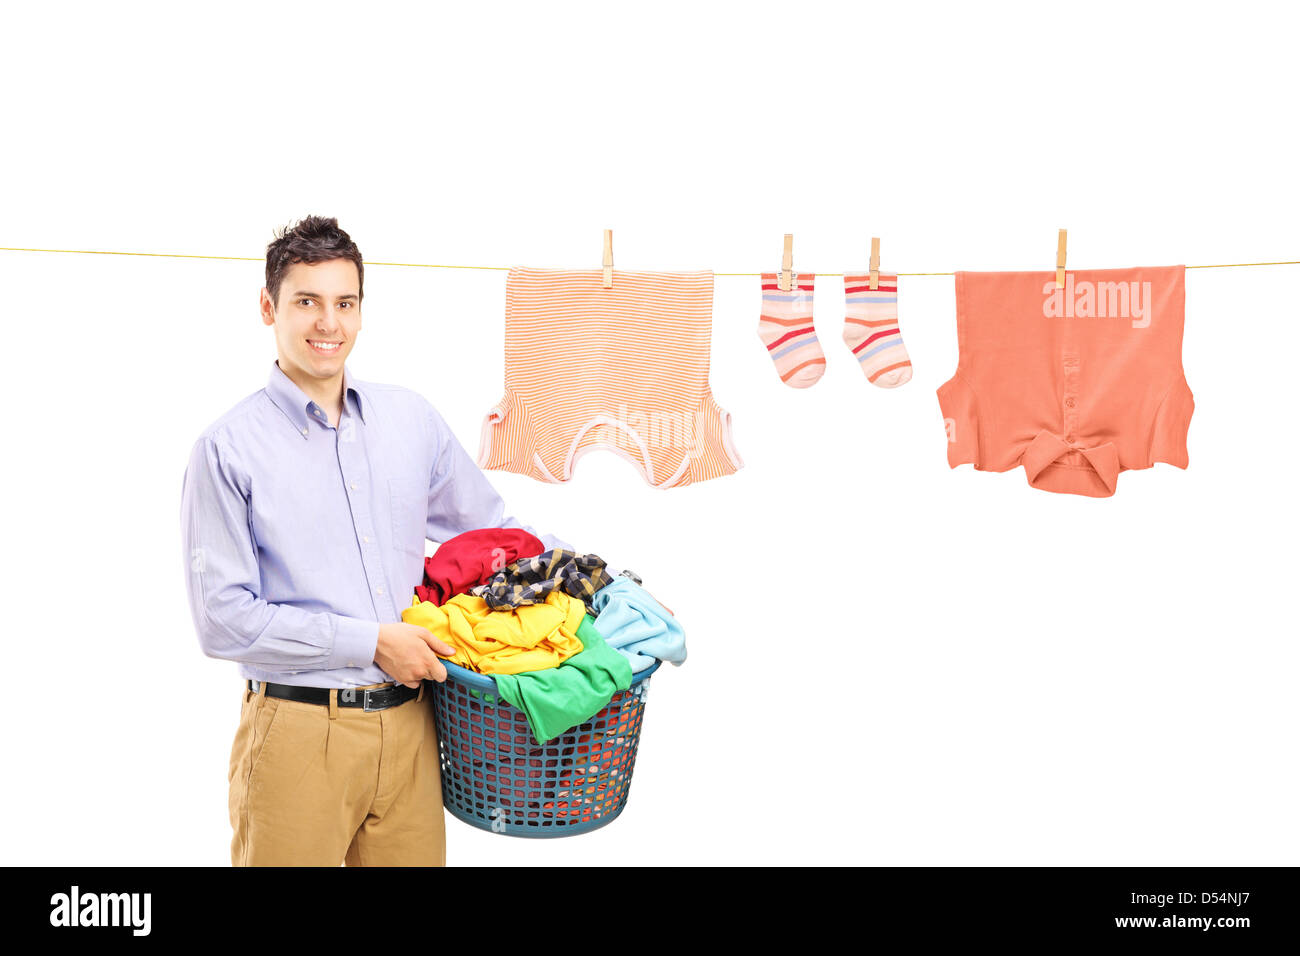 Smiling guy holding a laundry bin and a laundry line with clothes isolated on white background Stock Photo